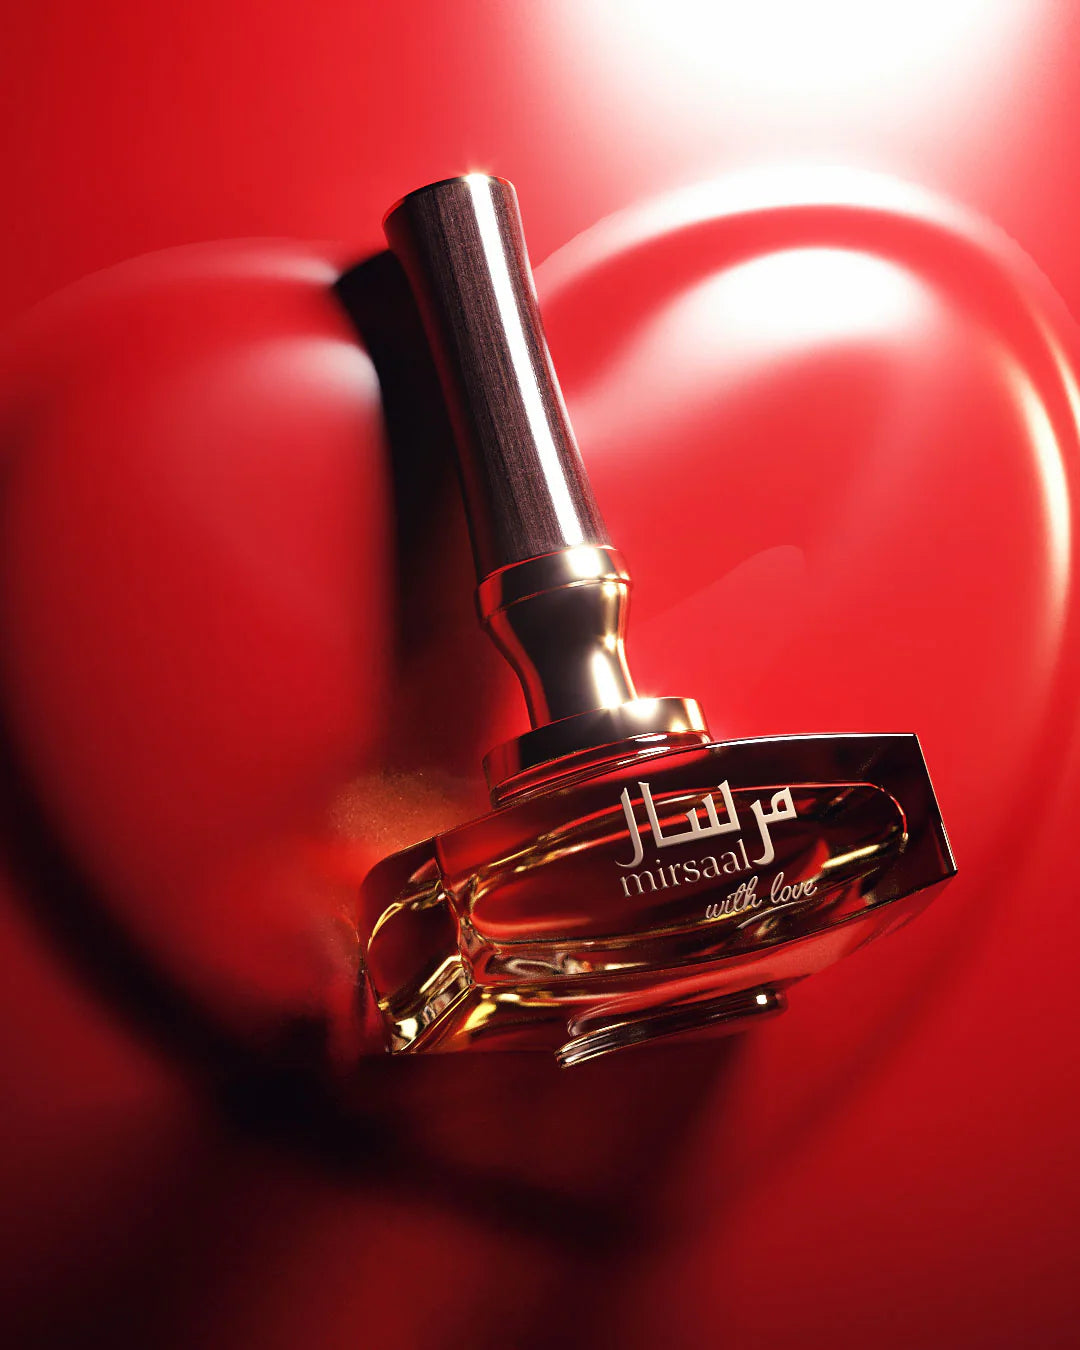 The image displays a perfume bottle named "Mirsaal with love" by Afnan Perfumes, set against a vivid red background with a heart-shaped light reflection, emphasizing the romantic theme of the product. The bottle has a clear, angular design with a golden neck and a wooden-textured cap, placed to capture the light in a way that enhances its luxurious features. The romantic and warm ambiance of the image suggests an intimate and loving scent, aligning with the product's name and presentation.